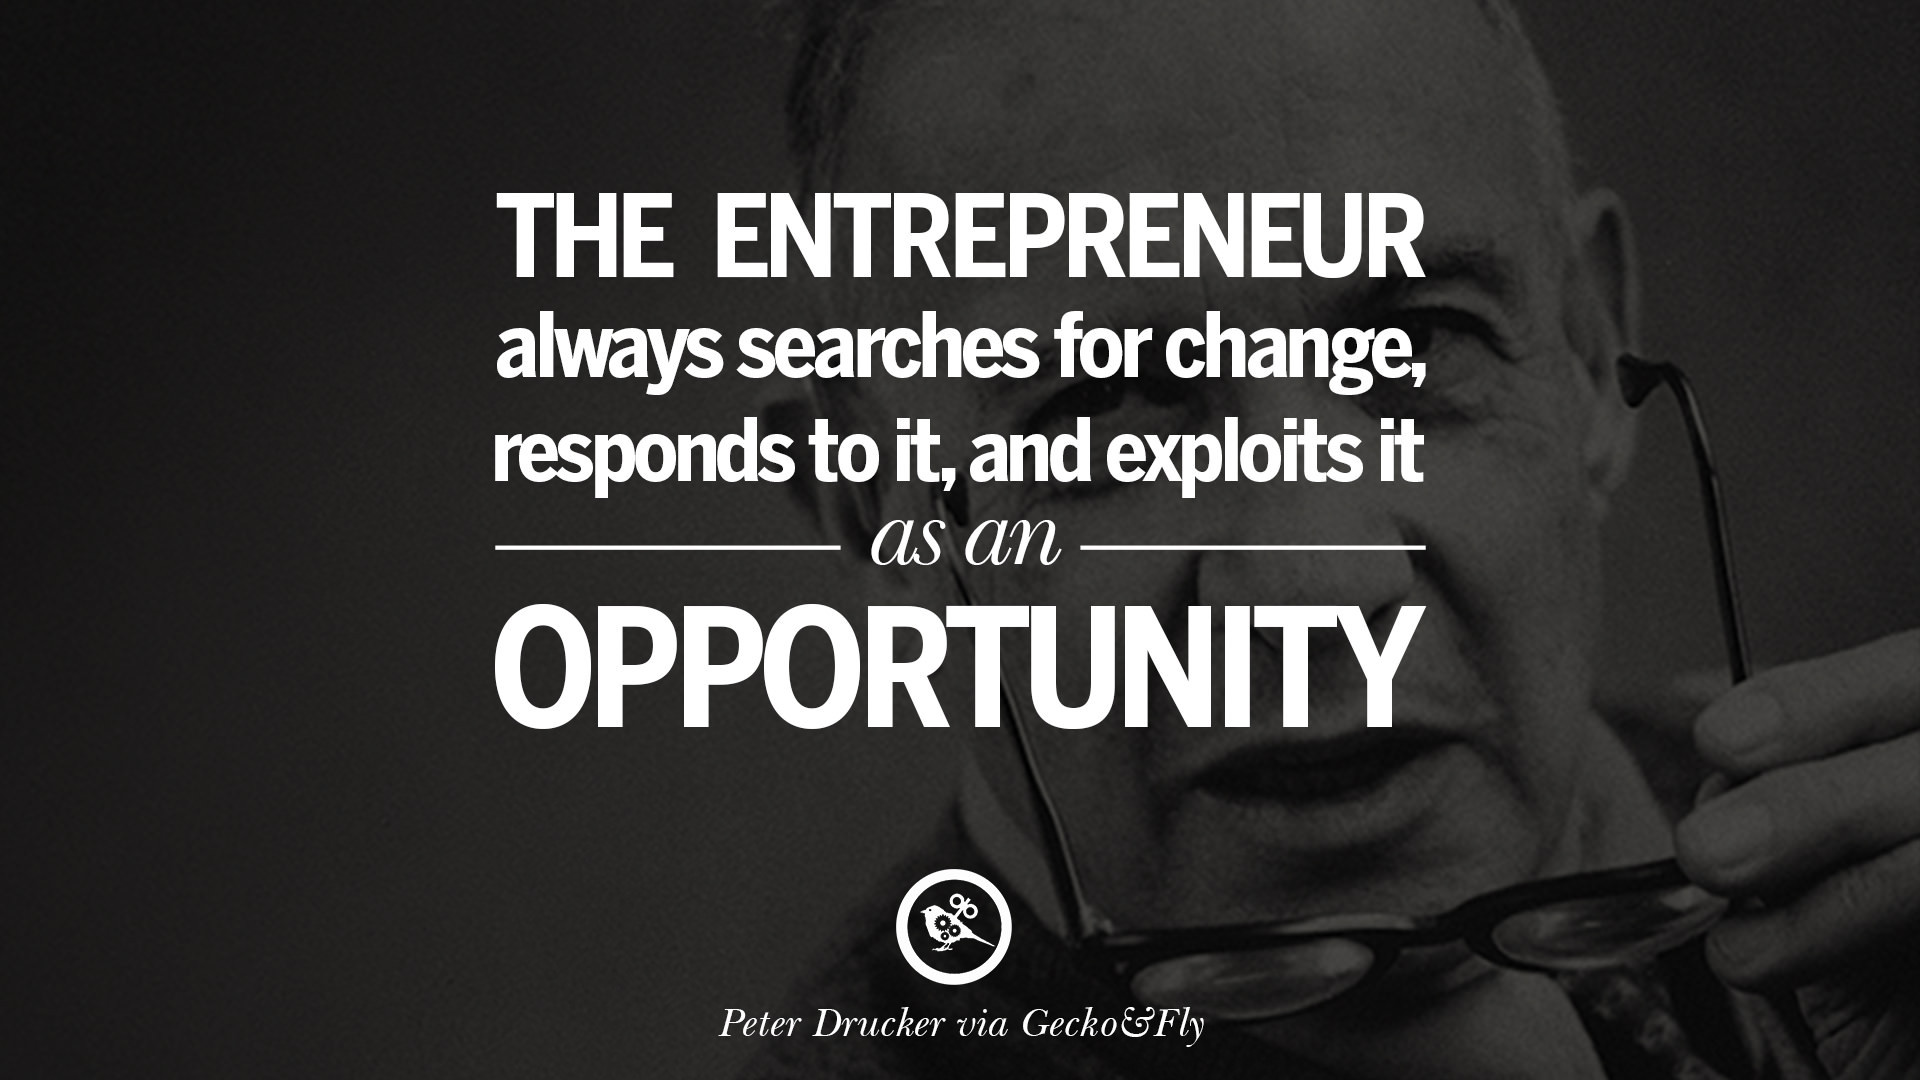 Inspirational Quote For Entrepreneur
 94 Inspiring Quotes For Entrepreneur When Starting Up A